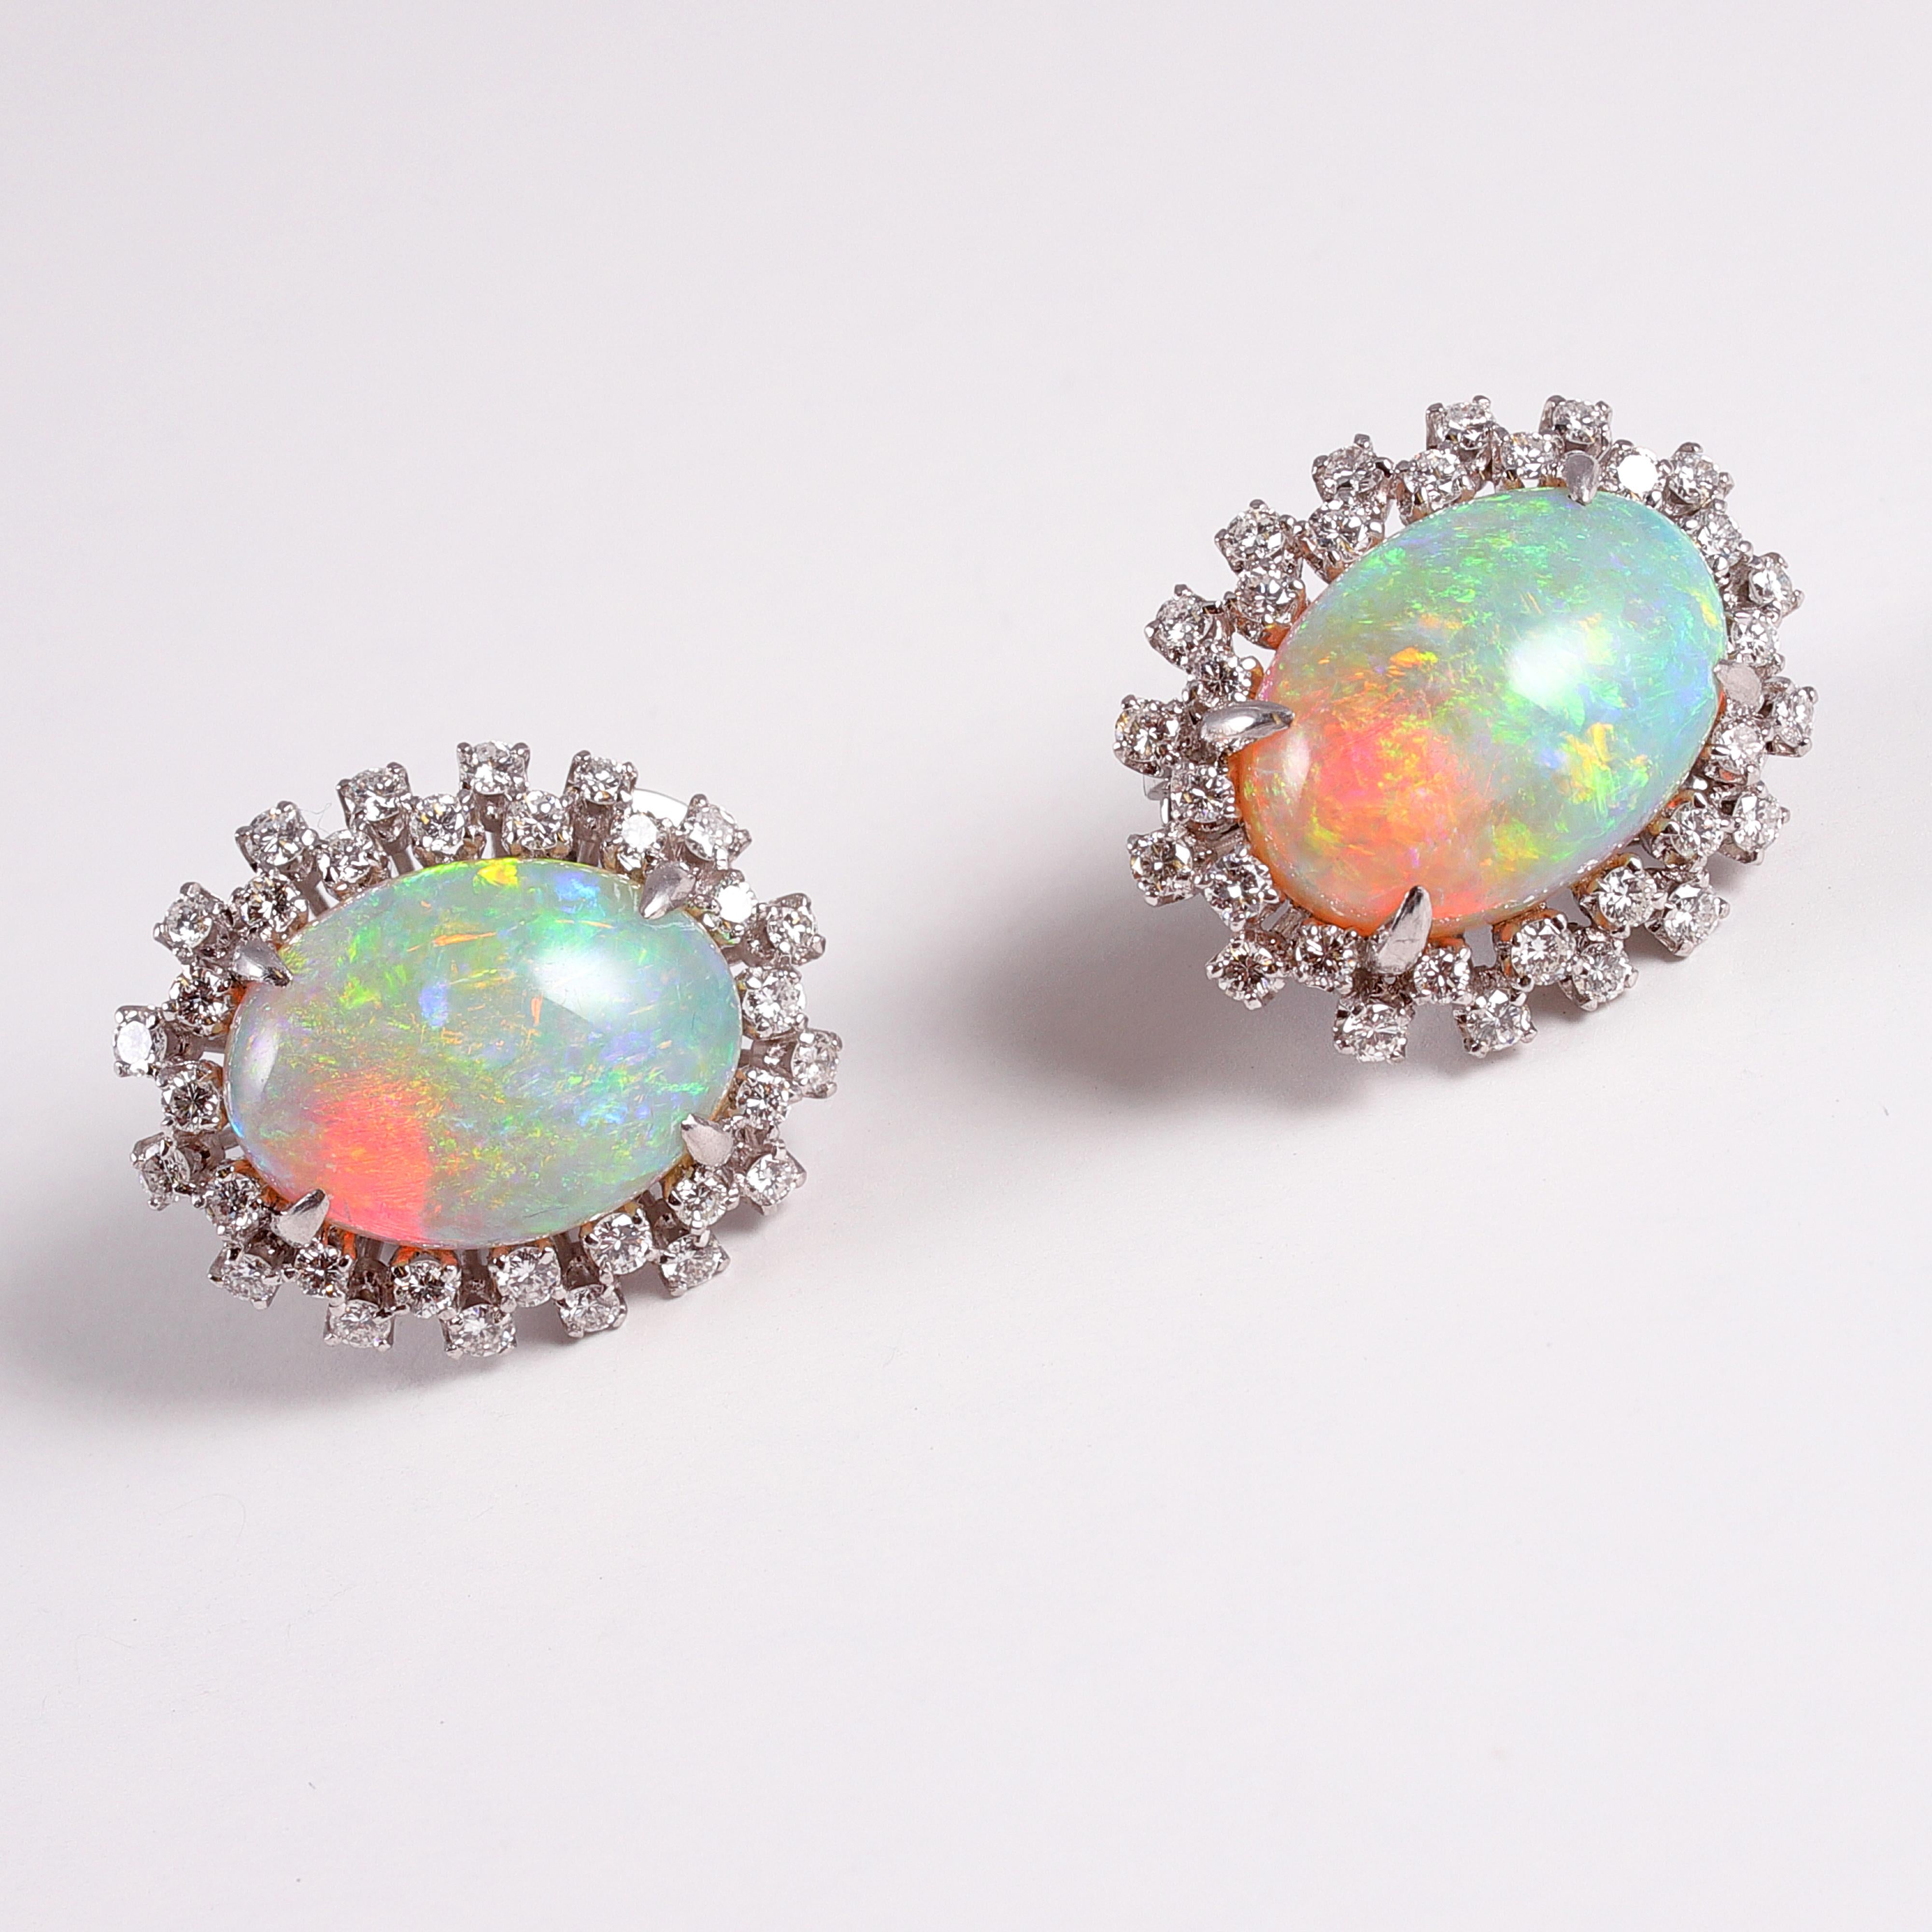 These clip on beauties are set in 14 karat white gold and support a total of 14.00 carats of opals and 0.75 carats of diamonds!